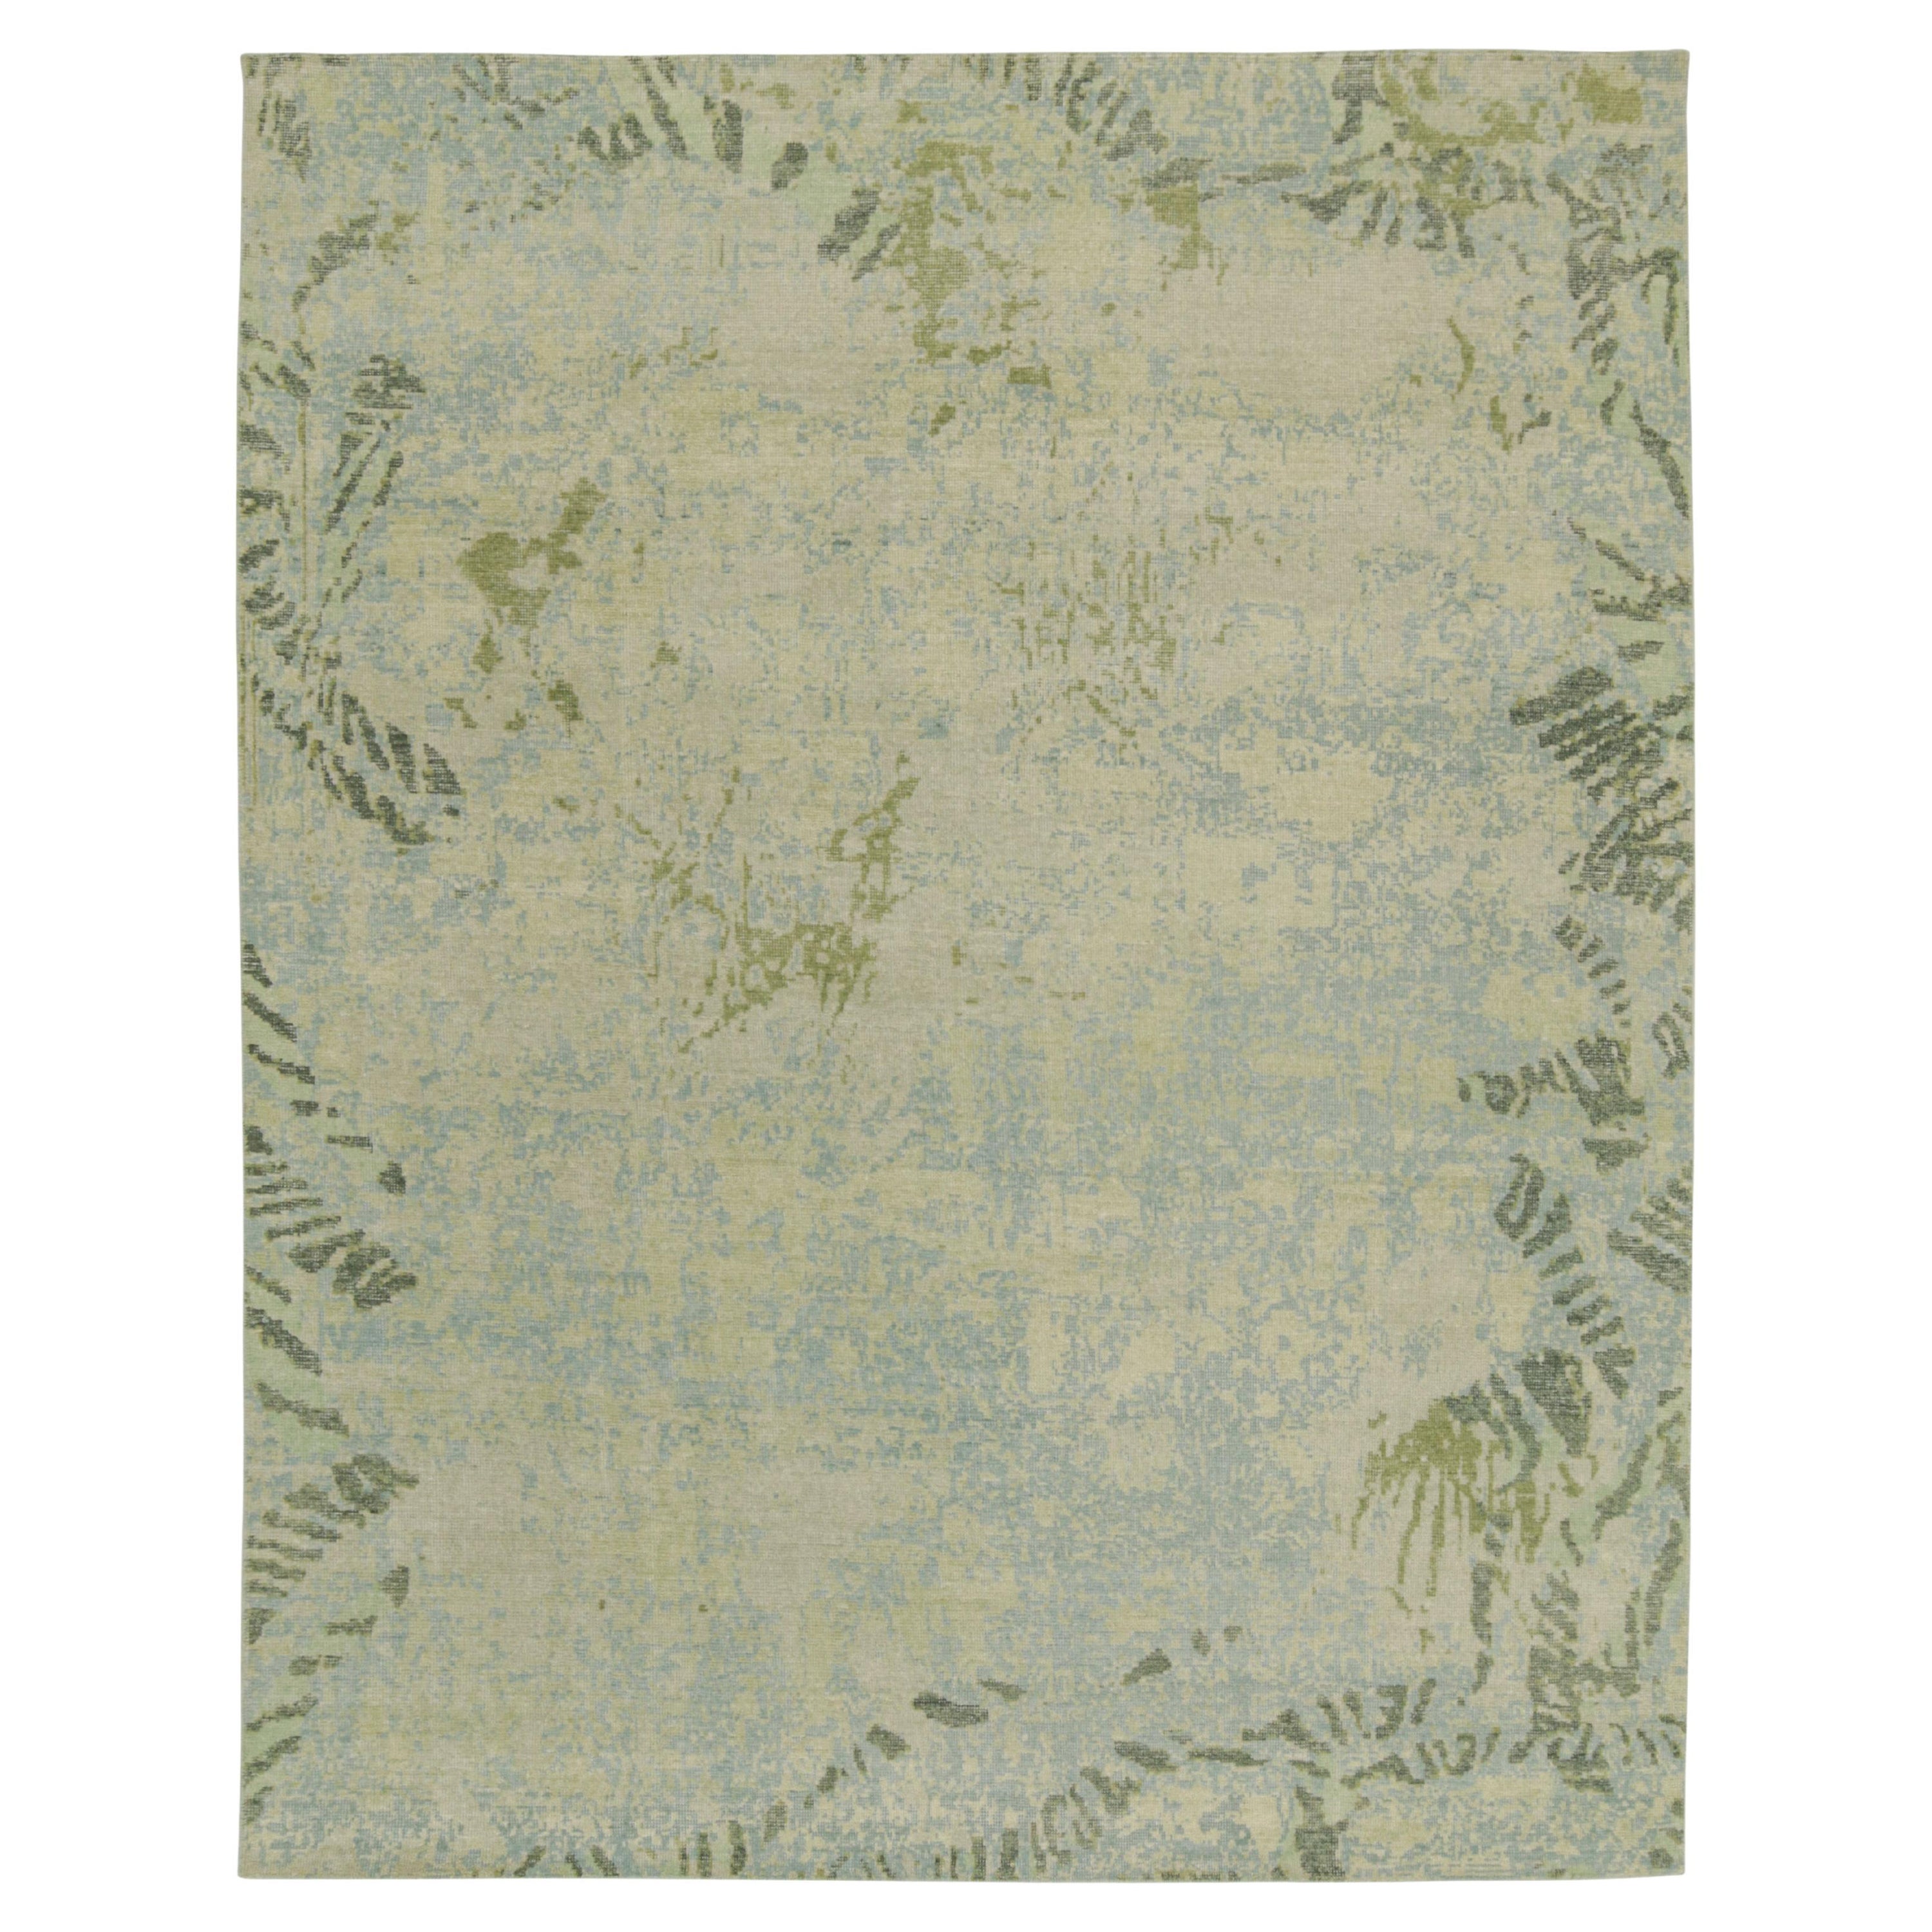 Rug & Kilim's Distressed Style Abstract Rug in Blue, Gray and Green Pattern (Tapis abstrait à motifs bleus, gris et verts)